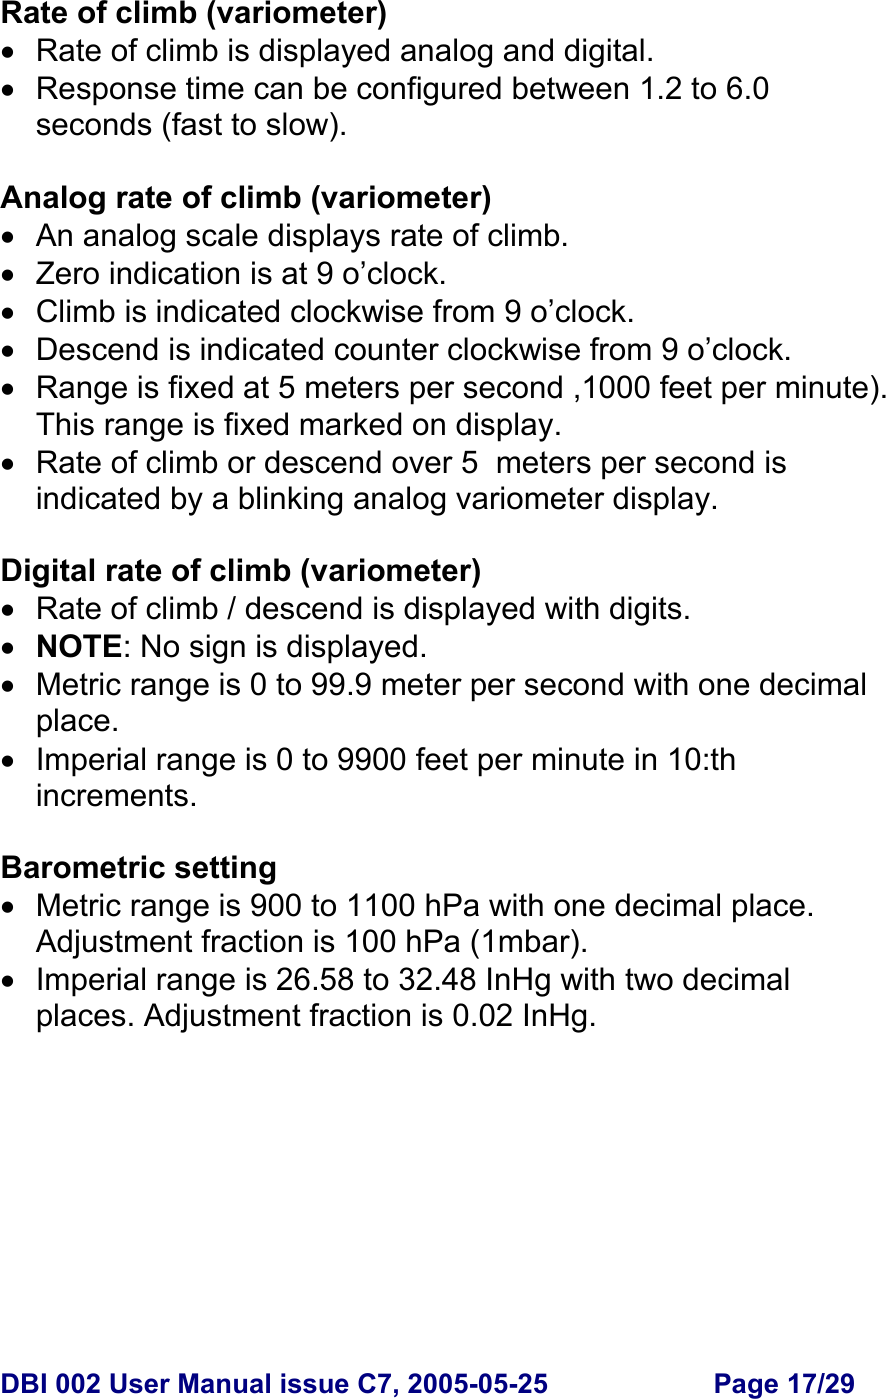  DBI 002 User Manual issue C7, 2005-05-25  Page 17/29  Rate of climb (variometer) •  Rate of climb is displayed analog and digital. •  Response time can be configured between 1.2 to 6.0 seconds (fast to slow).  Analog rate of climb (variometer) •  An analog scale displays rate of climb. • Zero indication is at 9 o’clock. •  Climb is indicated clockwise from 9 o’clock. •  Descend is indicated counter clockwise from 9 o’clock. •  Range is fixed at 5 meters per second ,1000 feet per minute). This range is fixed marked on display. •  Rate of climb or descend over 5  meters per second is indicated by a blinking analog variometer display.  Digital rate of climb (variometer) •  Rate of climb / descend is displayed with digits. • NOTE: No sign is displayed. •  Metric range is 0 to 99.9 meter per second with one decimal place. •  Imperial range is 0 to 9900 feet per minute in 10:th increments.  Barometric setting •  Metric range is 900 to 1100 hPa with one decimal place. Adjustment fraction is 100 hPa (1mbar). •  Imperial range is 26.58 to 32.48 InHg with two decimal places. Adjustment fraction is 0.02 InHg.  